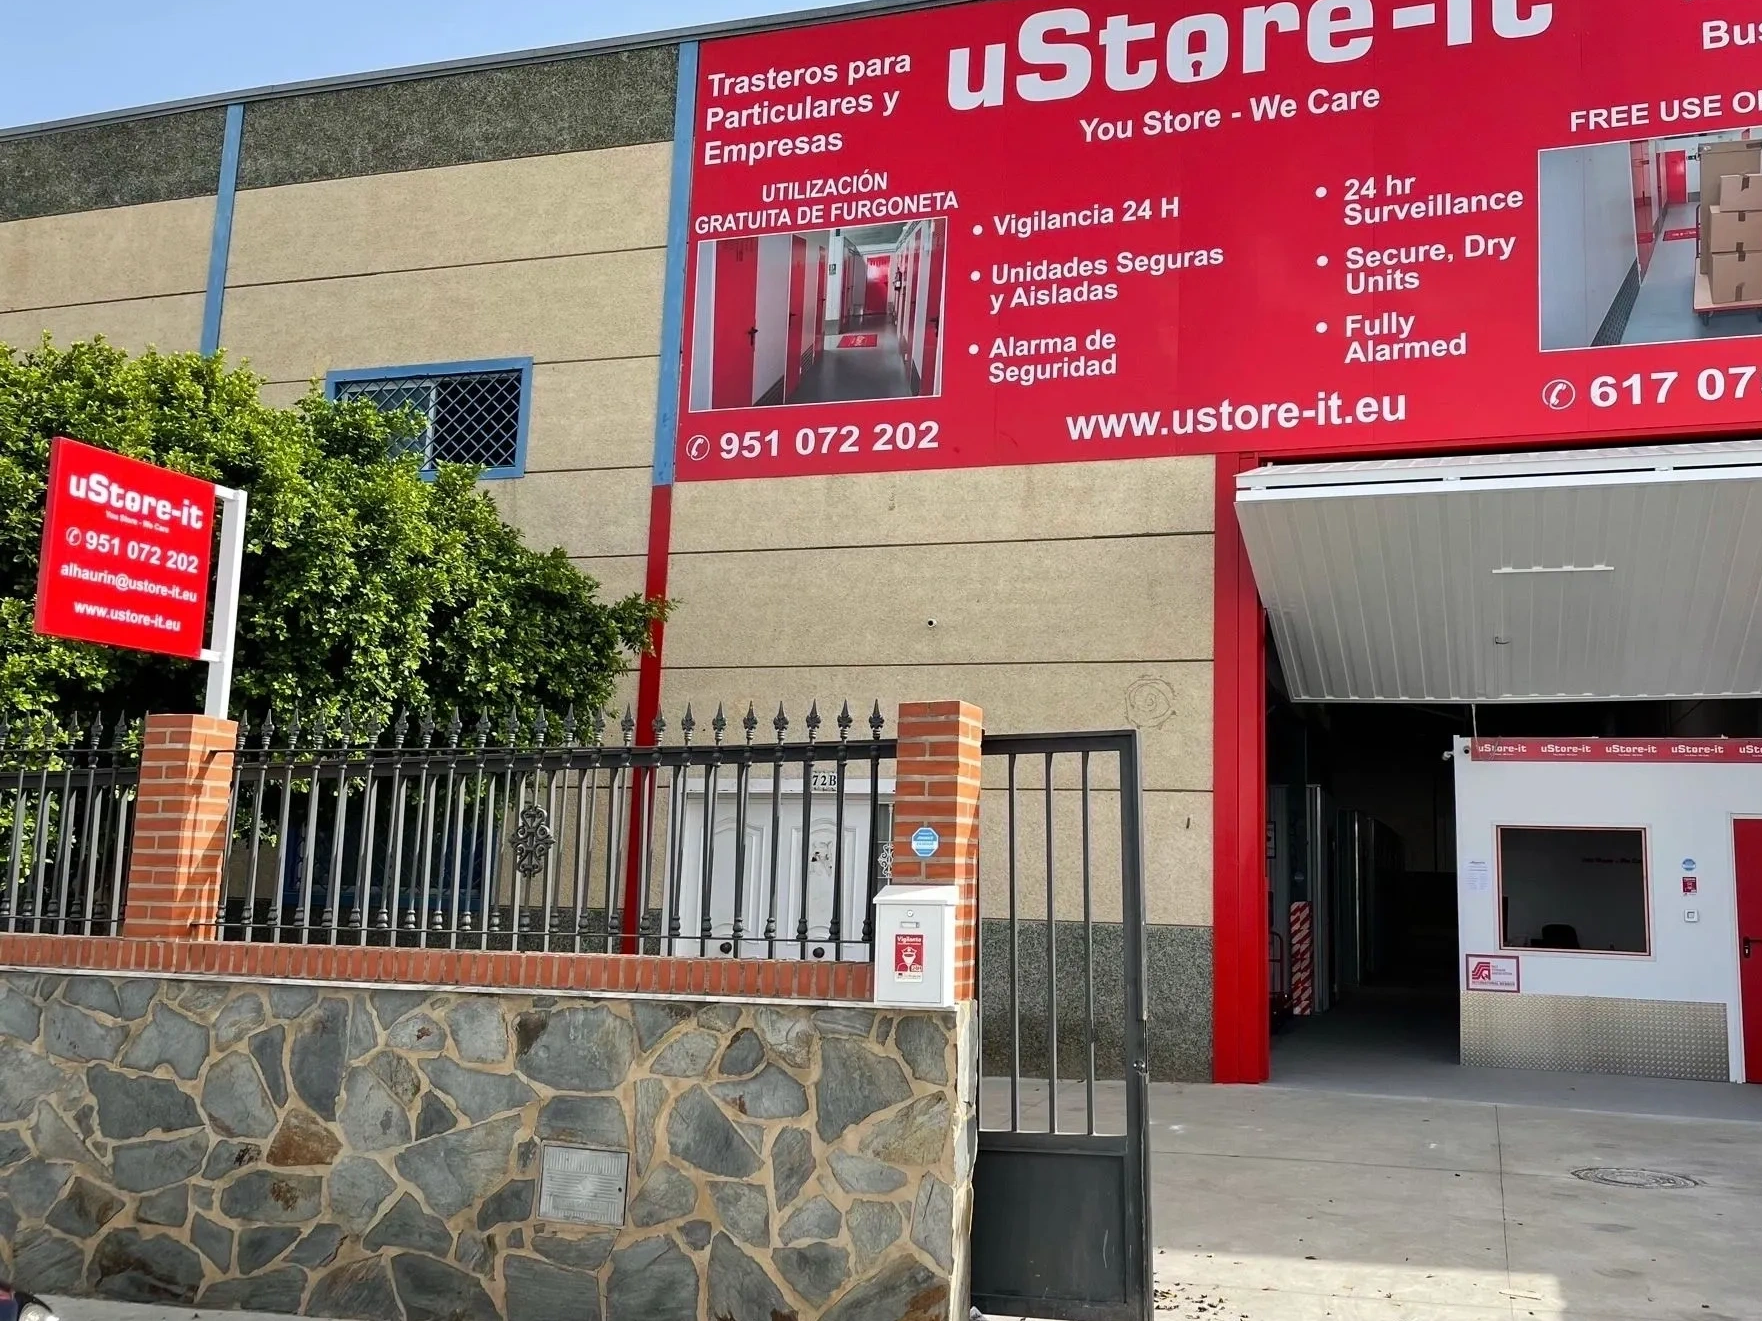 uStore-it self storage franchise business in Spain